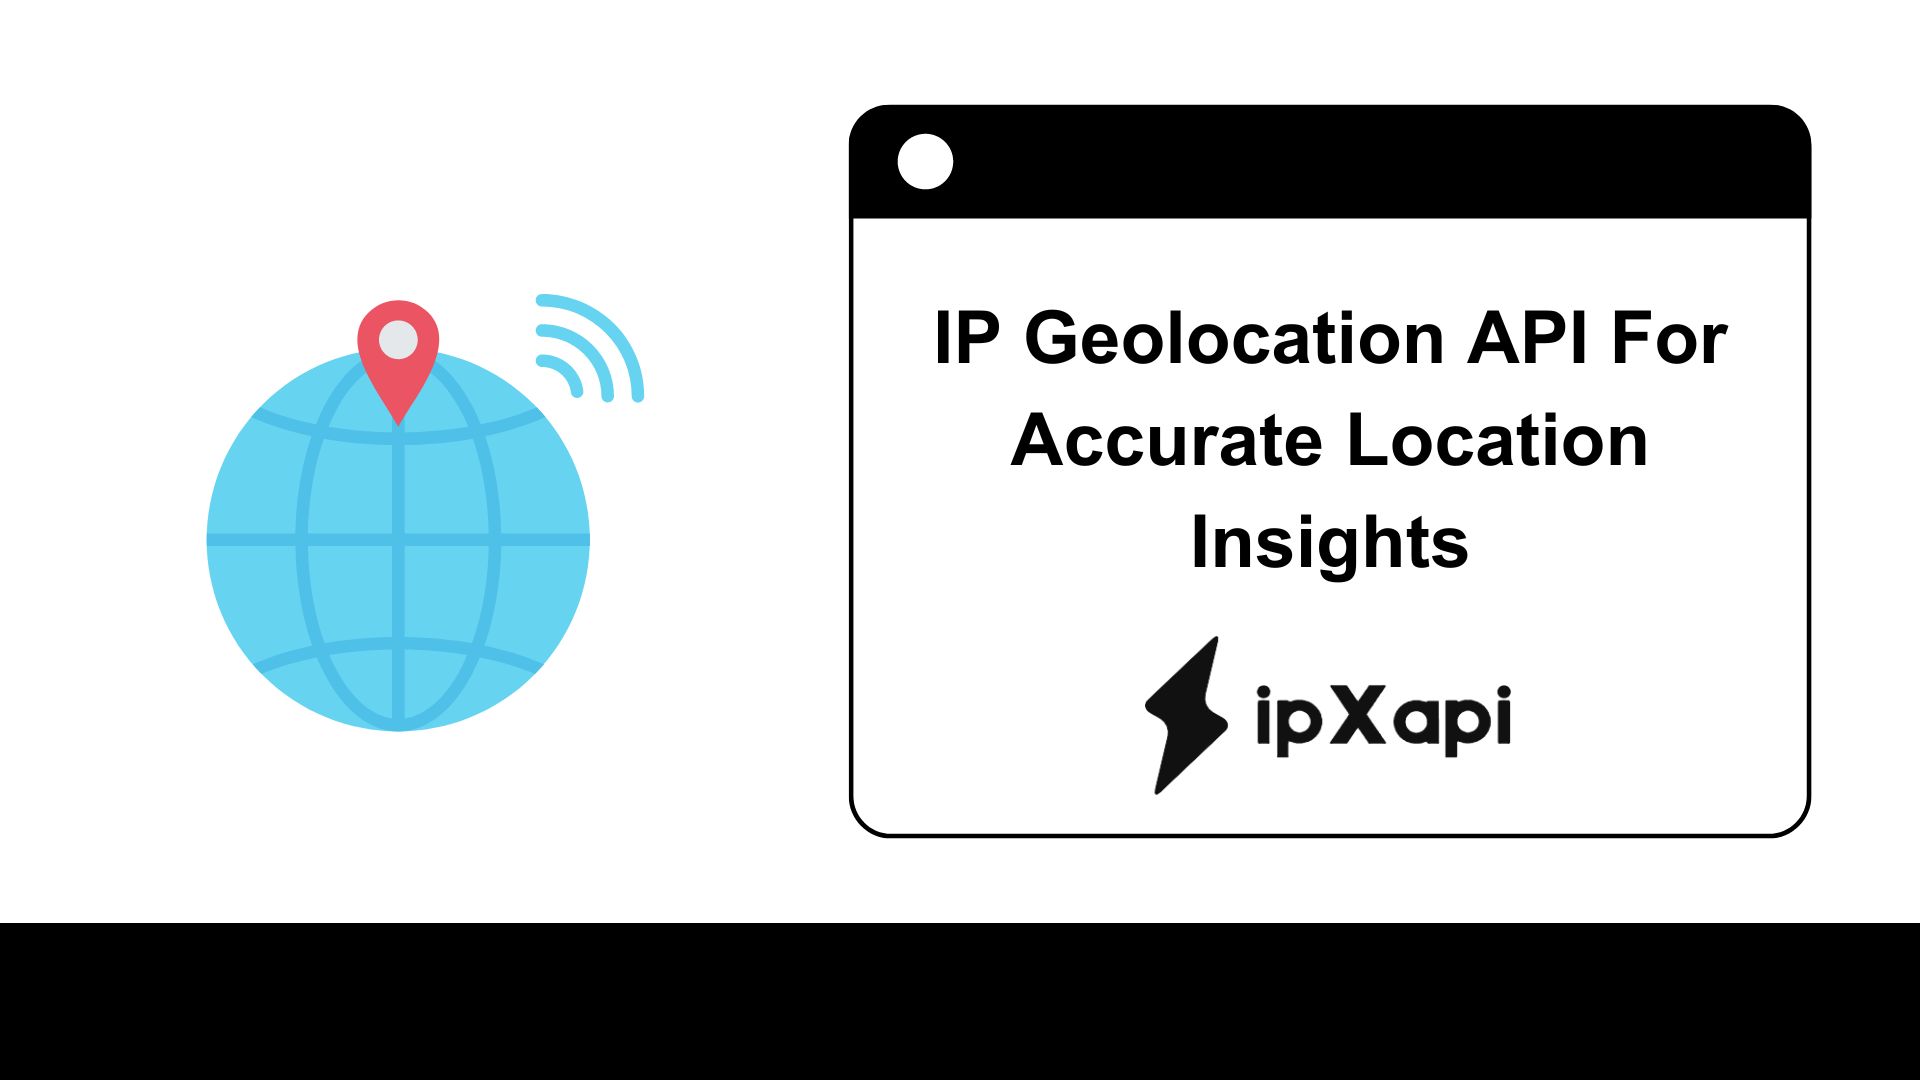 IP Geolocation API For Accurate Location Insights